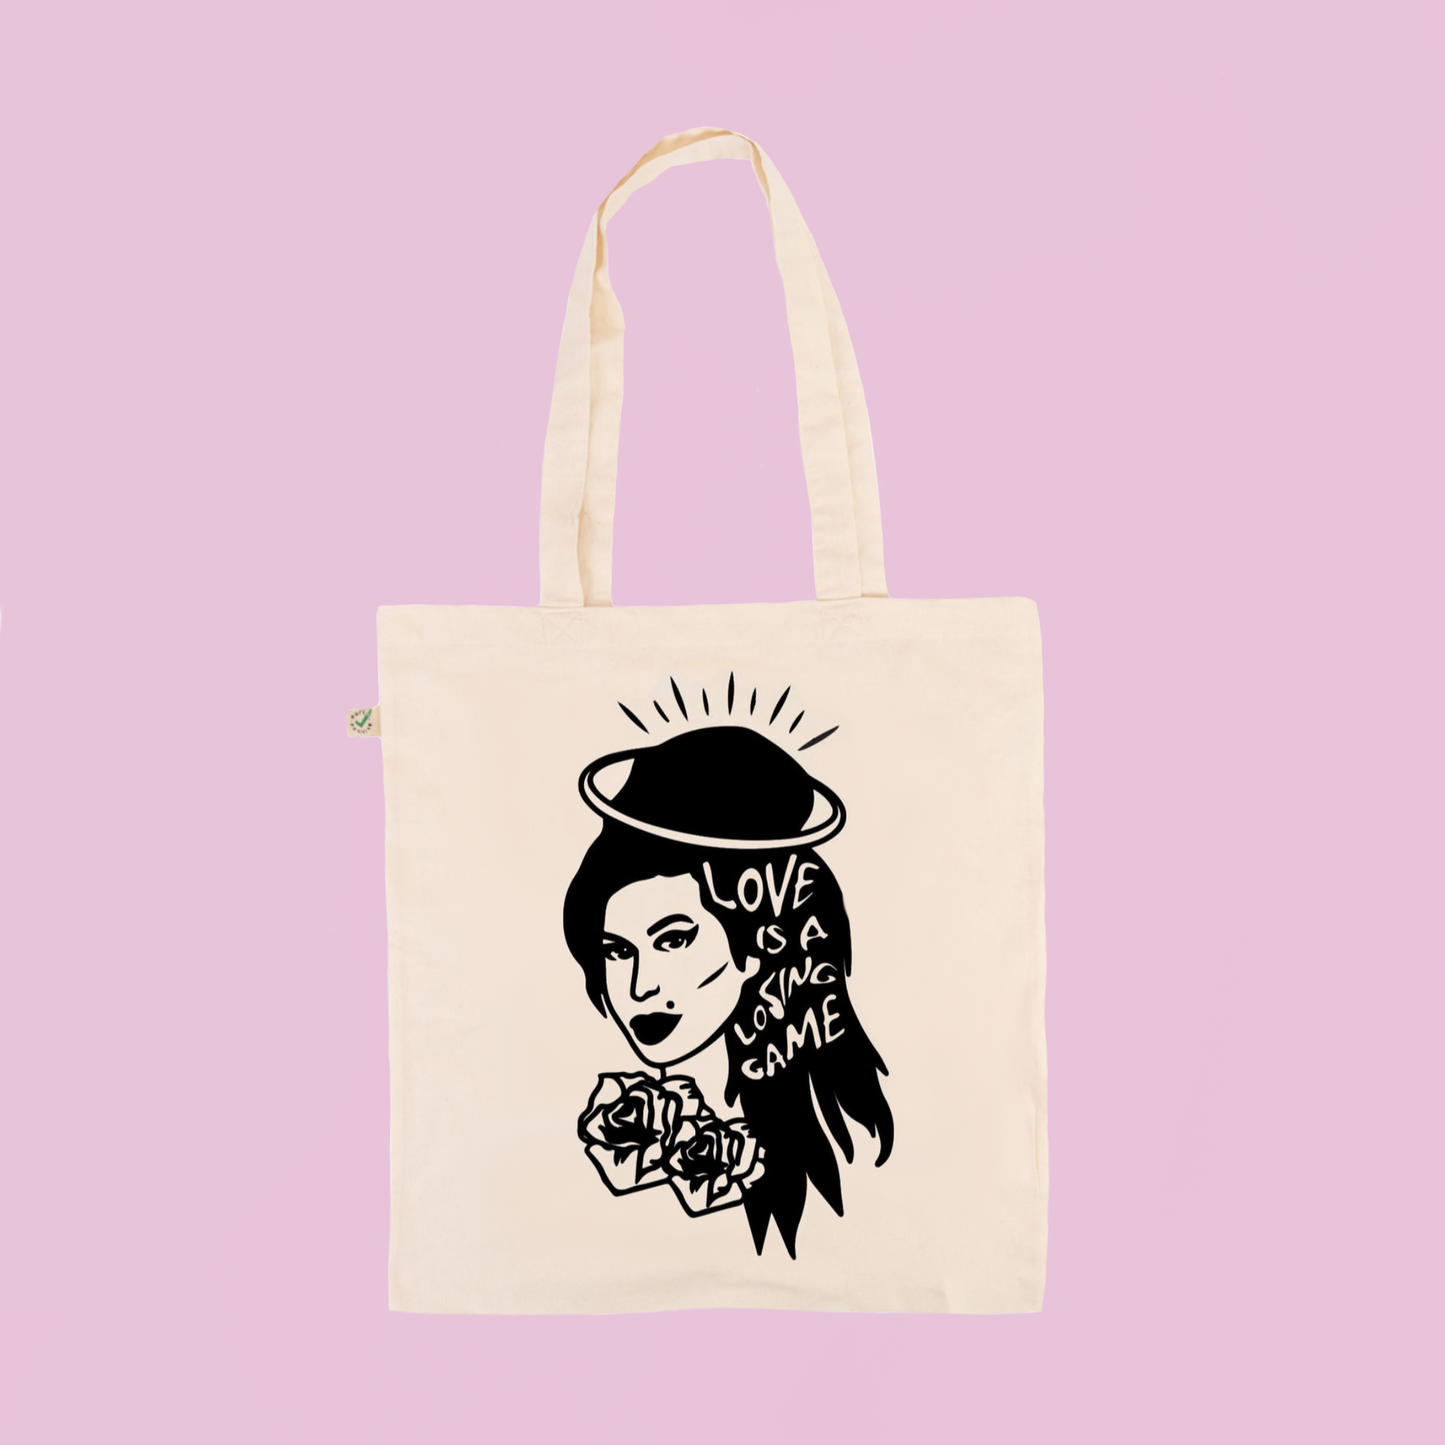 Love is a Losing Game. Earth Positive Ethical tote.